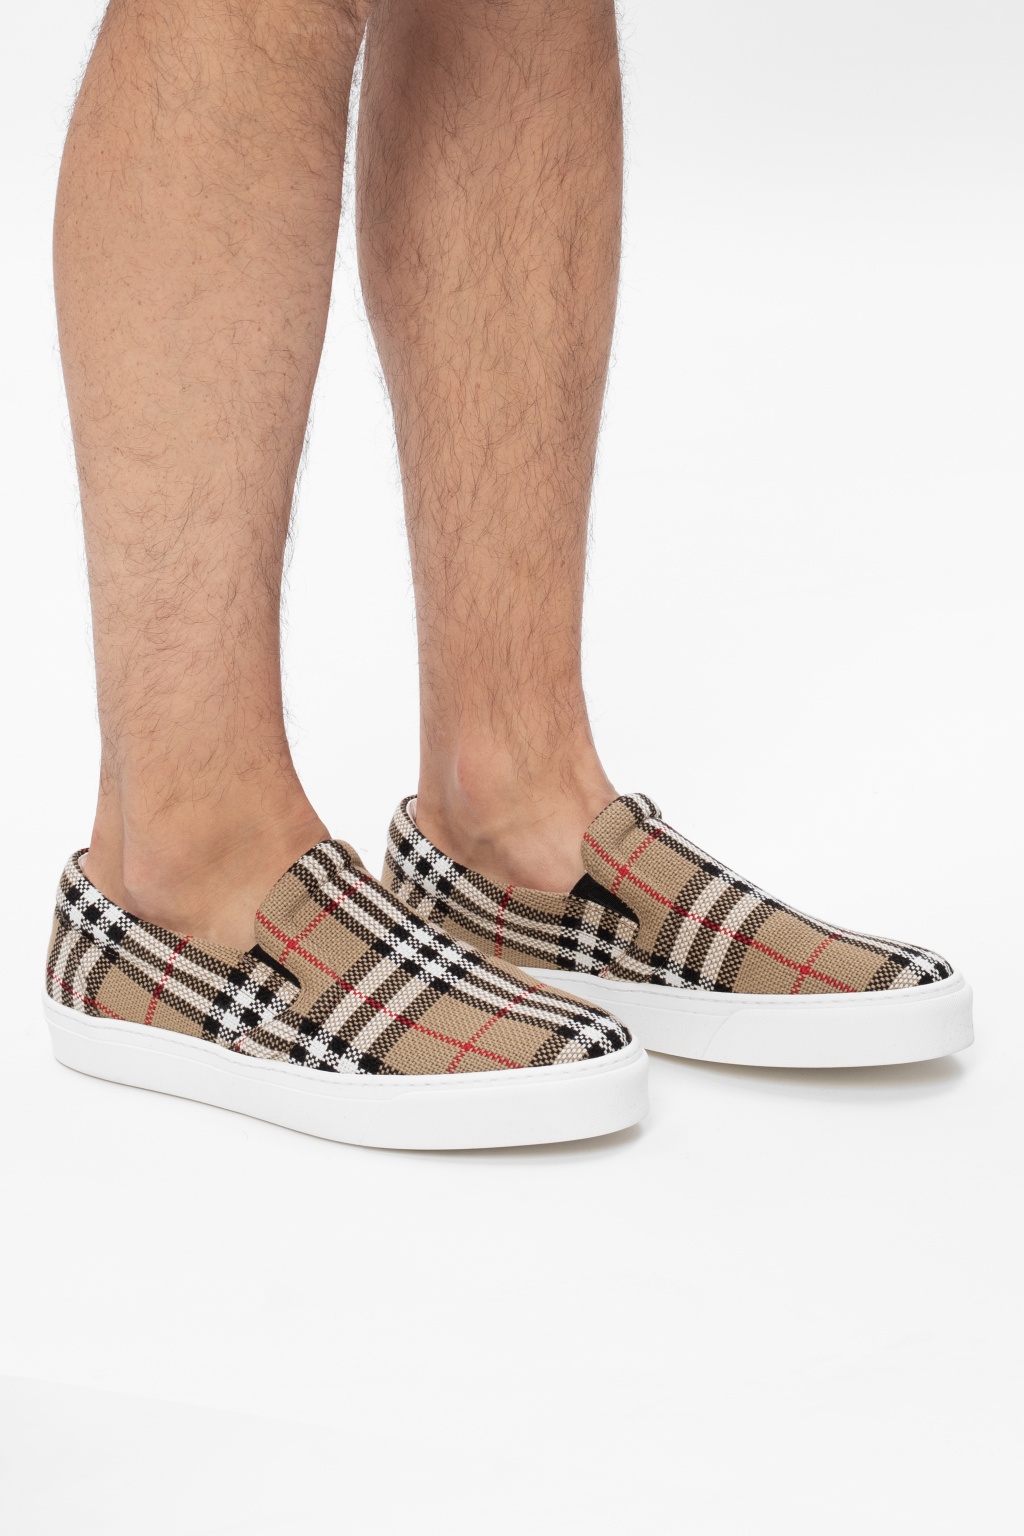 Burberry Patterned slip-on shoes